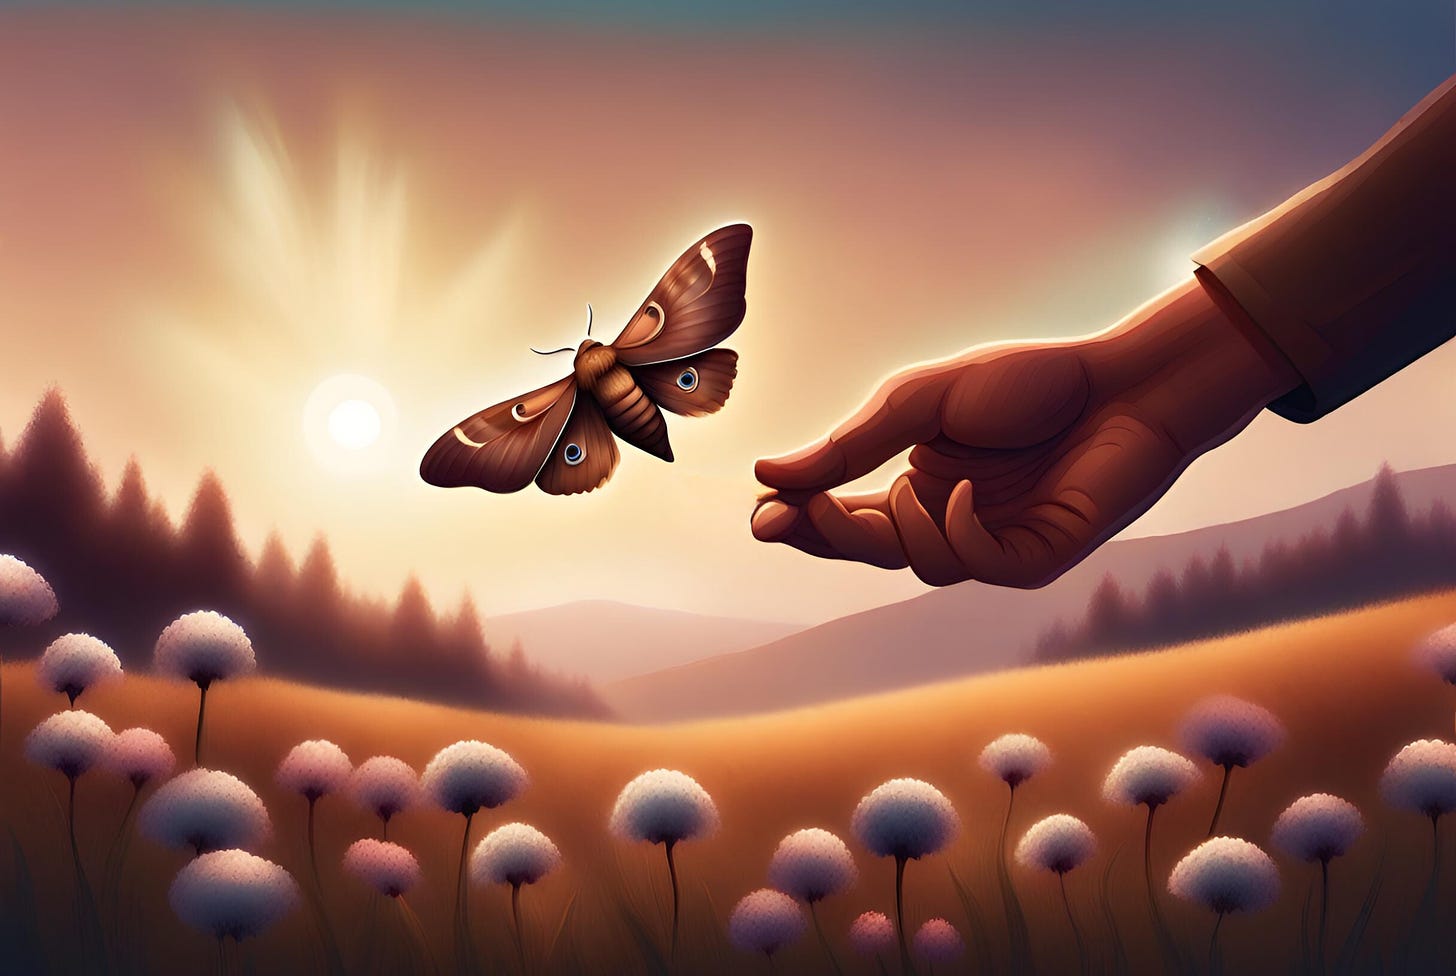 Illustration of a moth flying away from a man’s hand